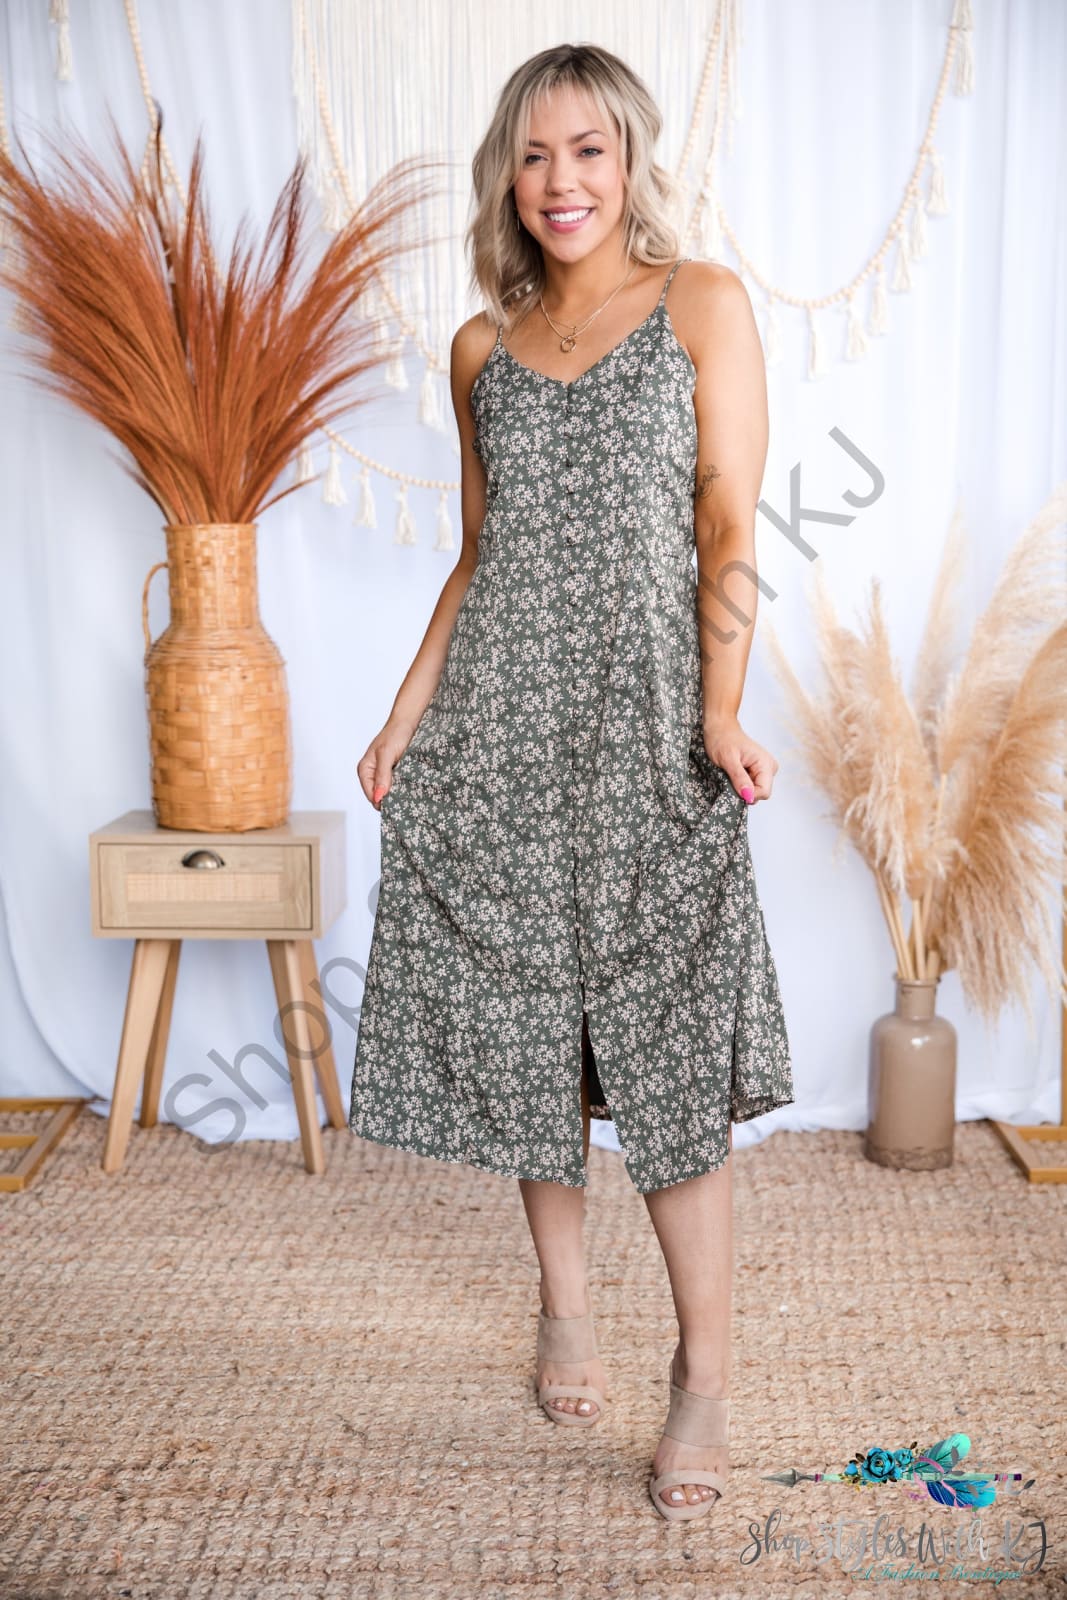 The Perfect Transition - Dress, sleeveless midi dress, olive floral dress, adjustable straps, back ties, v-neck and button detail, fall dress